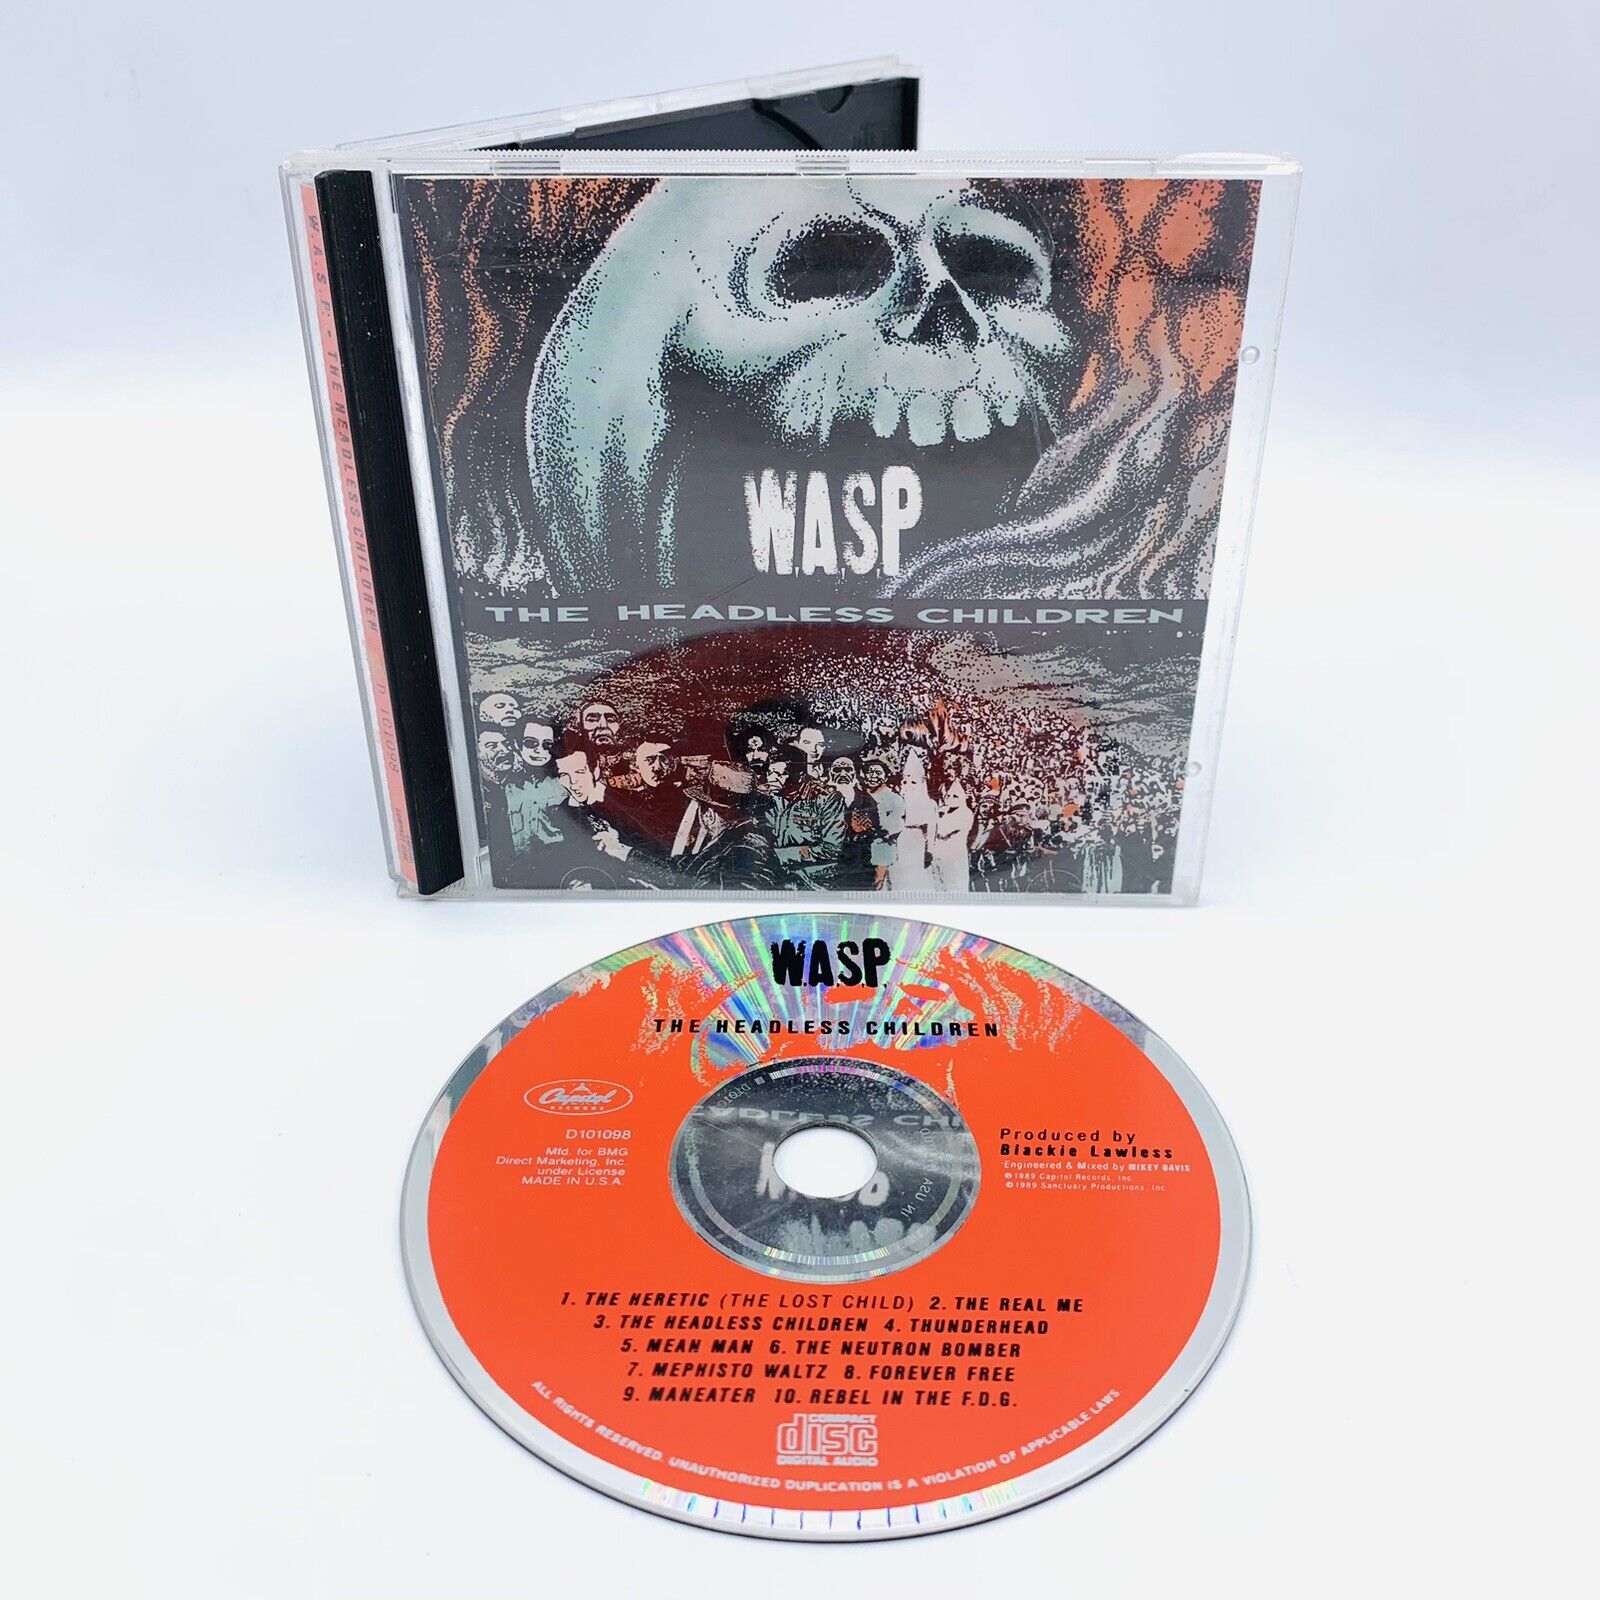 WASP The Headless Children (CD, 1989) Hard Rock Heavy Metal Rare OOP W.A.S.P.